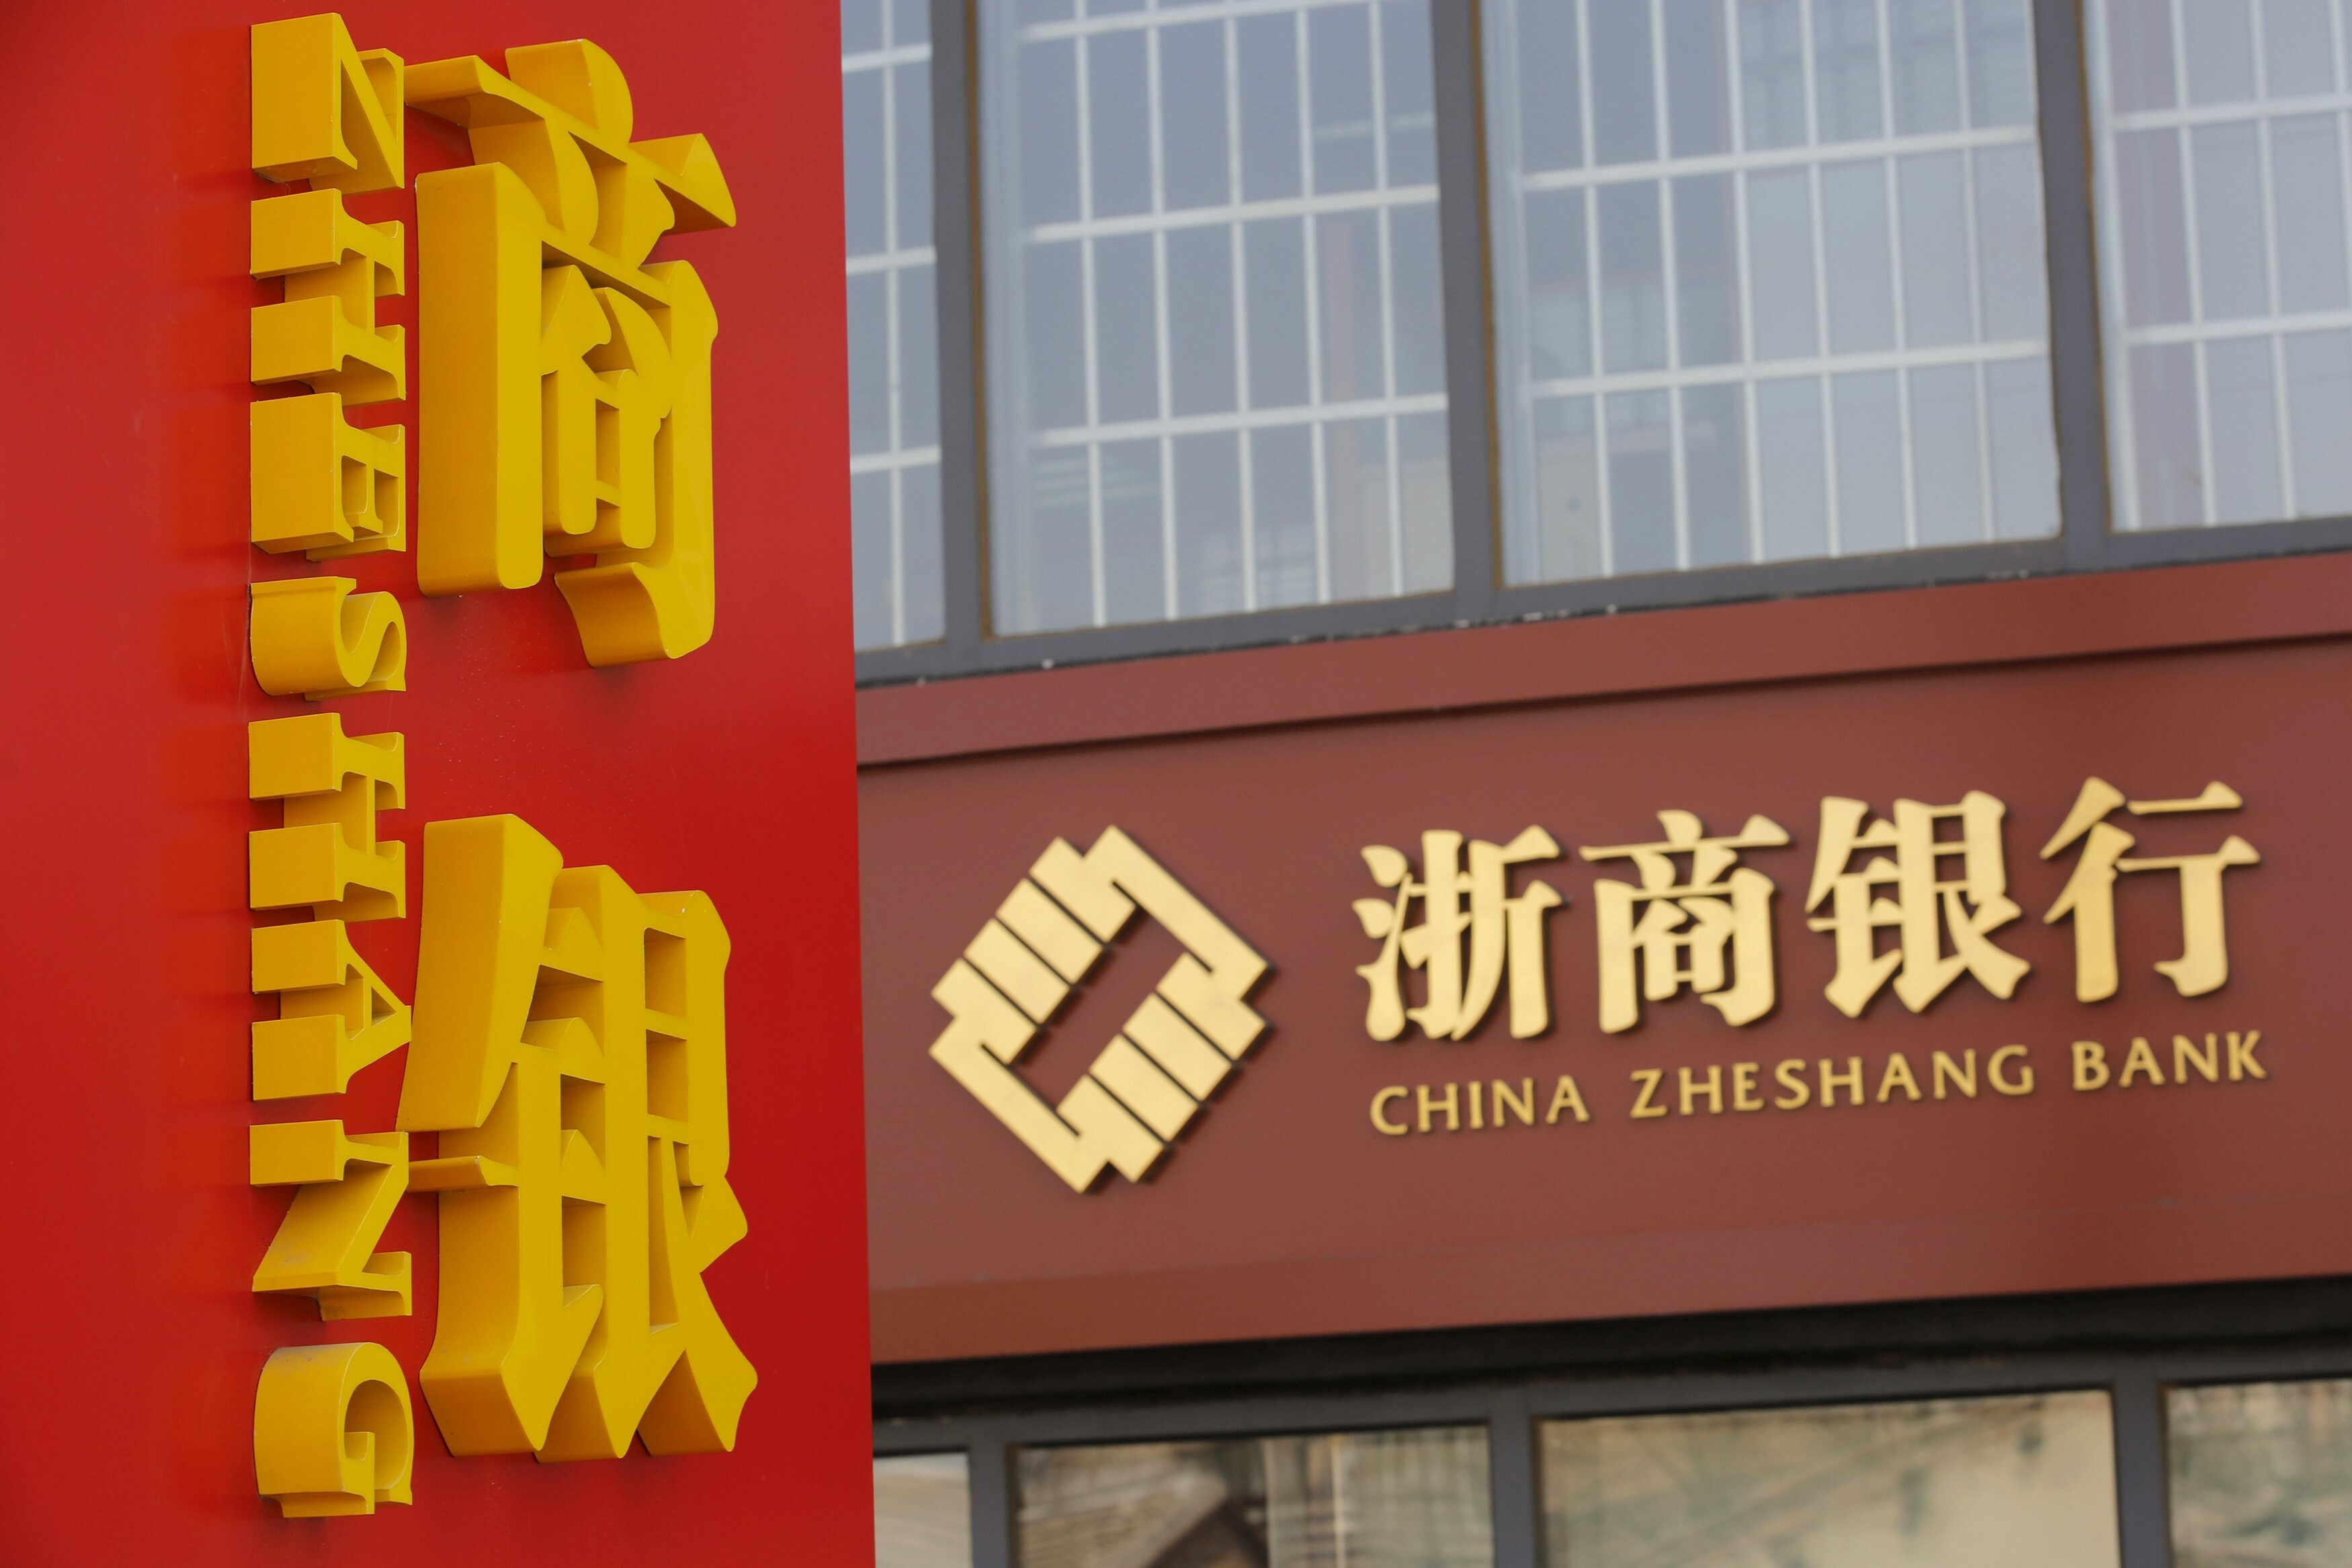 A signboard of China Zheshang Bank in Beijing on March 14, 2016. Photo: Reuters.